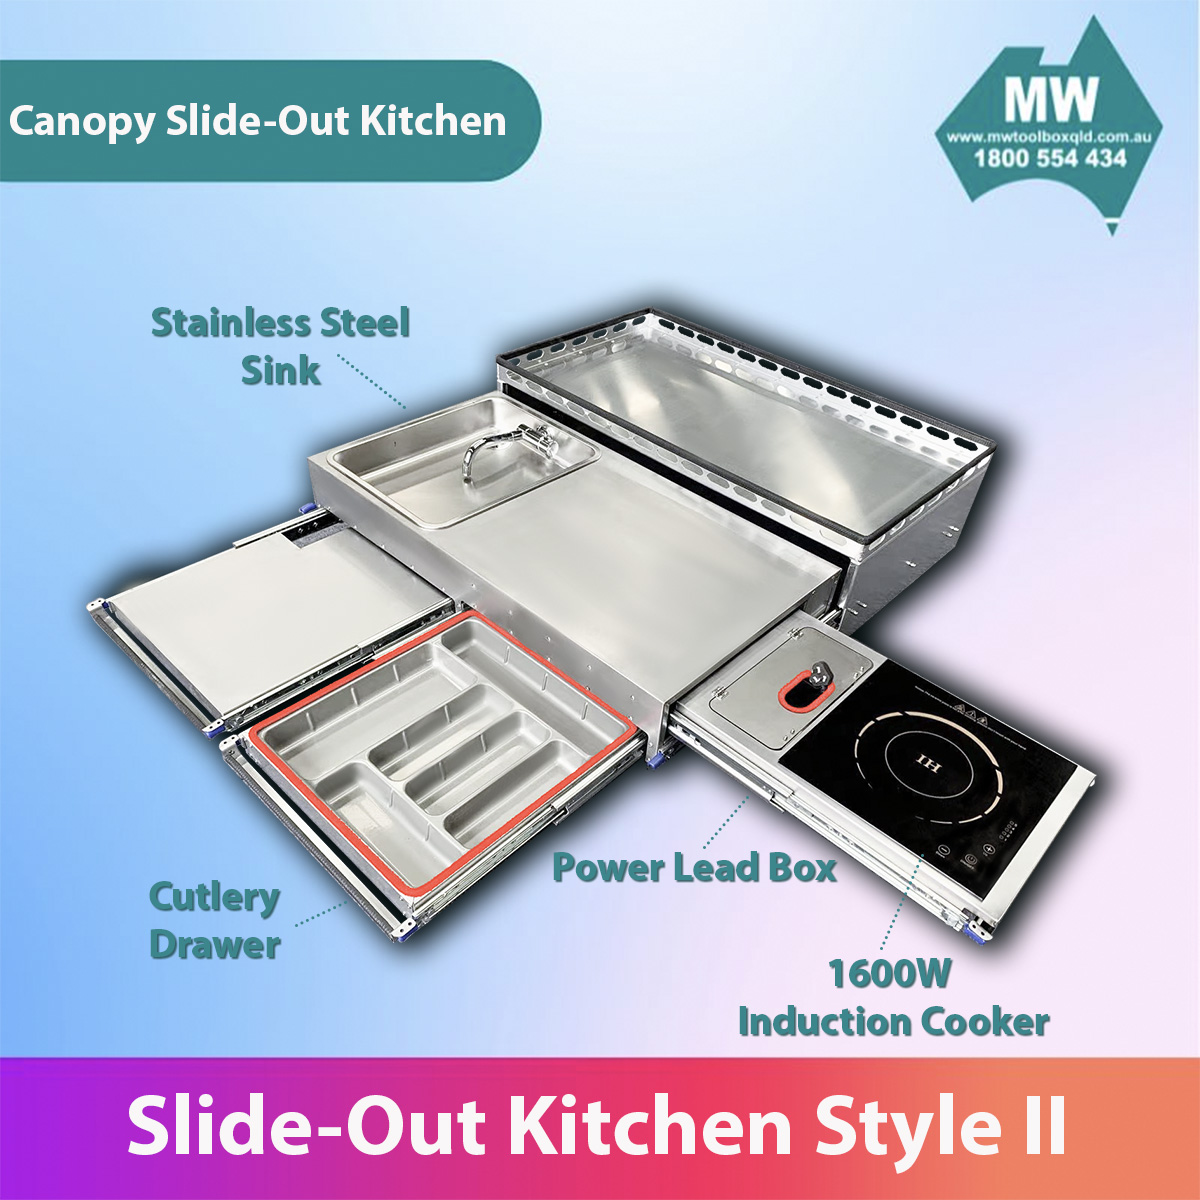 MW SLIDE OUT KITCHEN CANOPY KITCHEN STYLE II-6